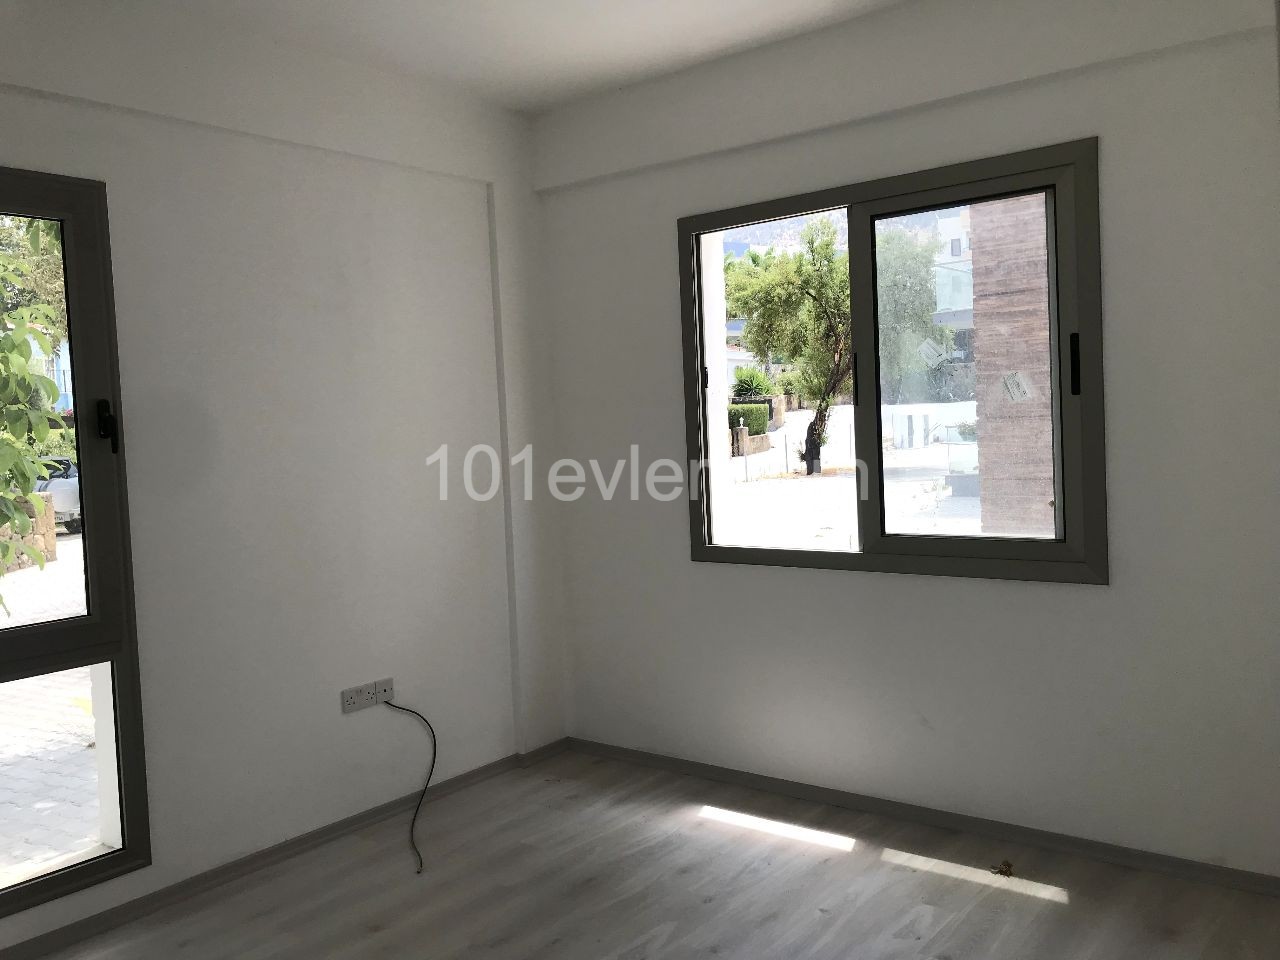 2+1 ground floor flat in Girne Lapta, ready to move in. 05338403555 ** 